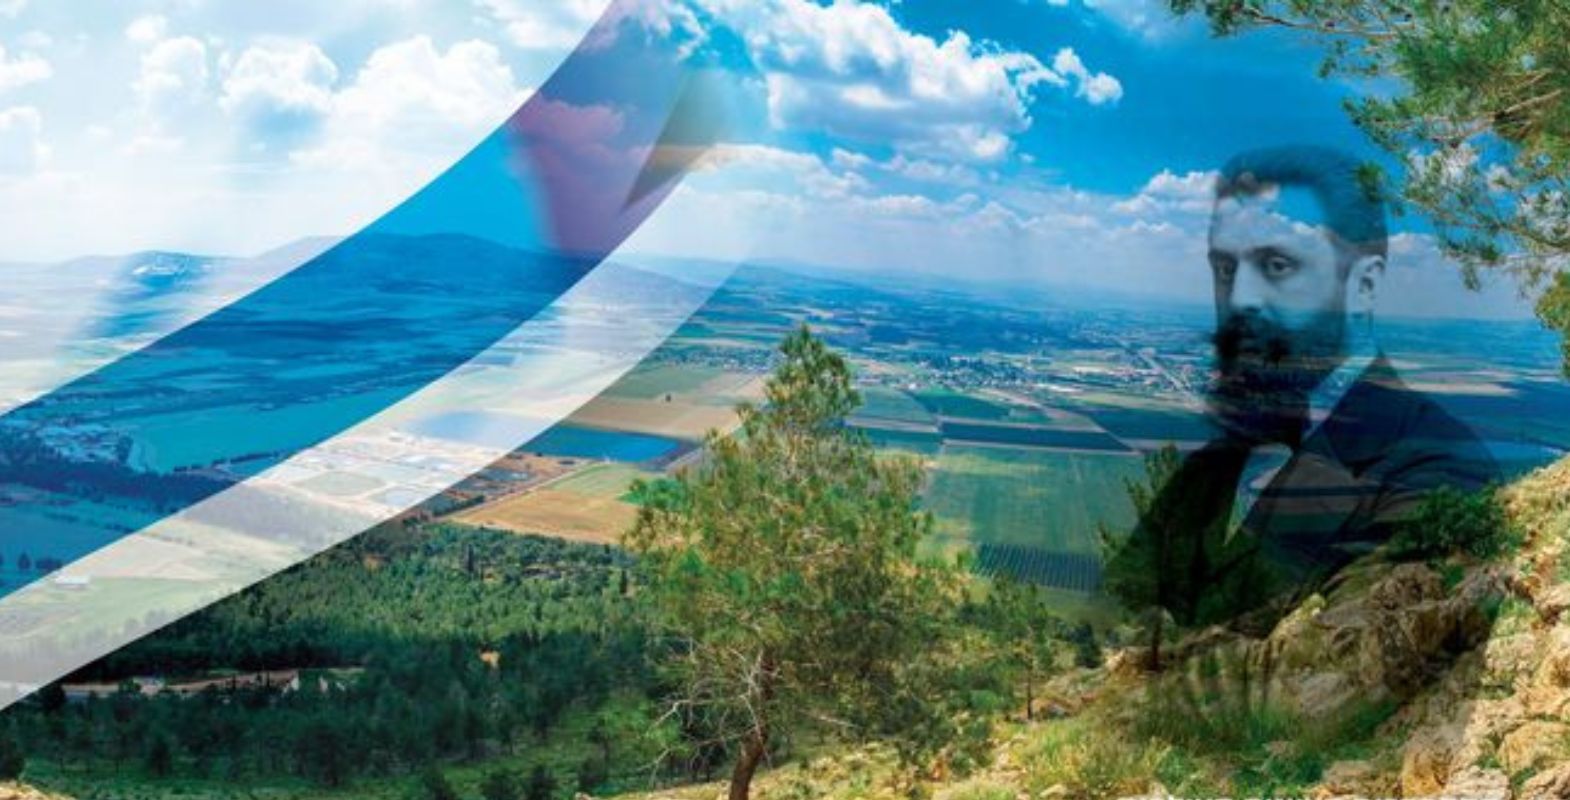 The figure of Herzl against a landscape of the Land of Israel